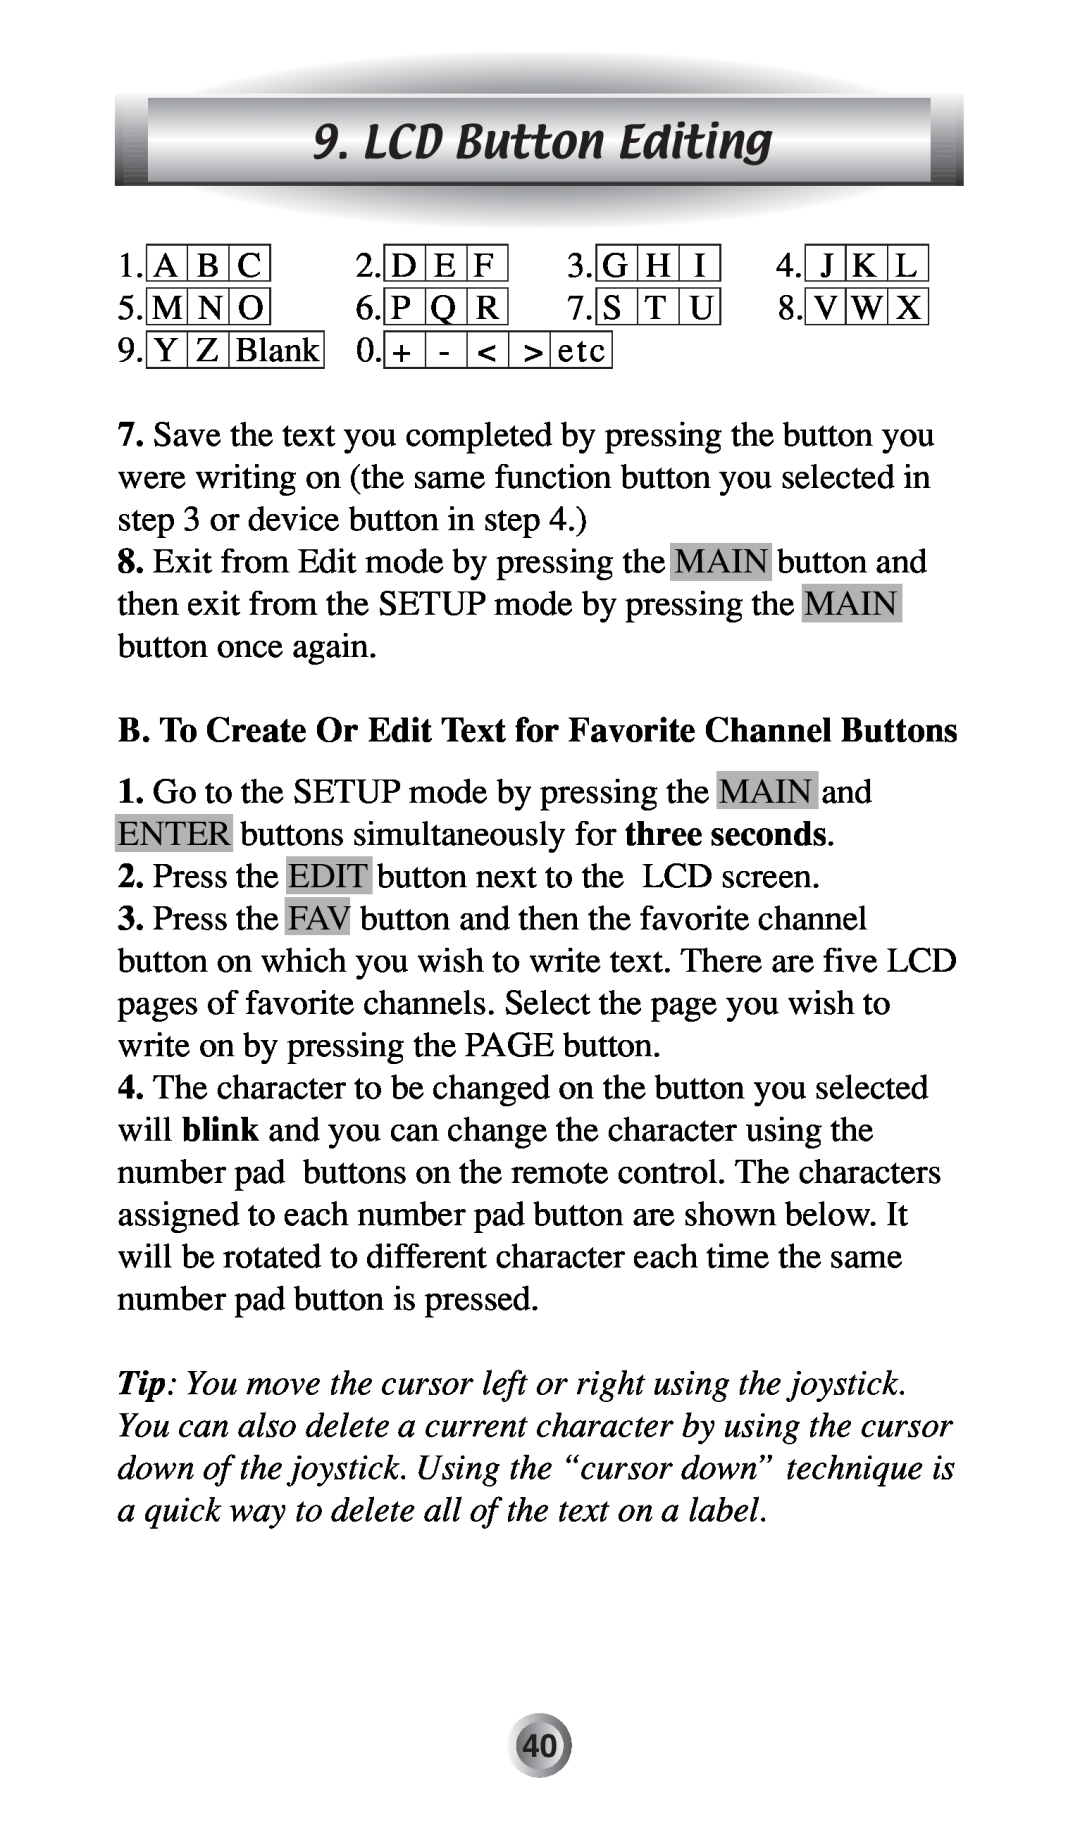 Radio Shack MX-500TM manual LCD Button Editing, B. To Create Or Edit Text for Favorite Channel Buttons 